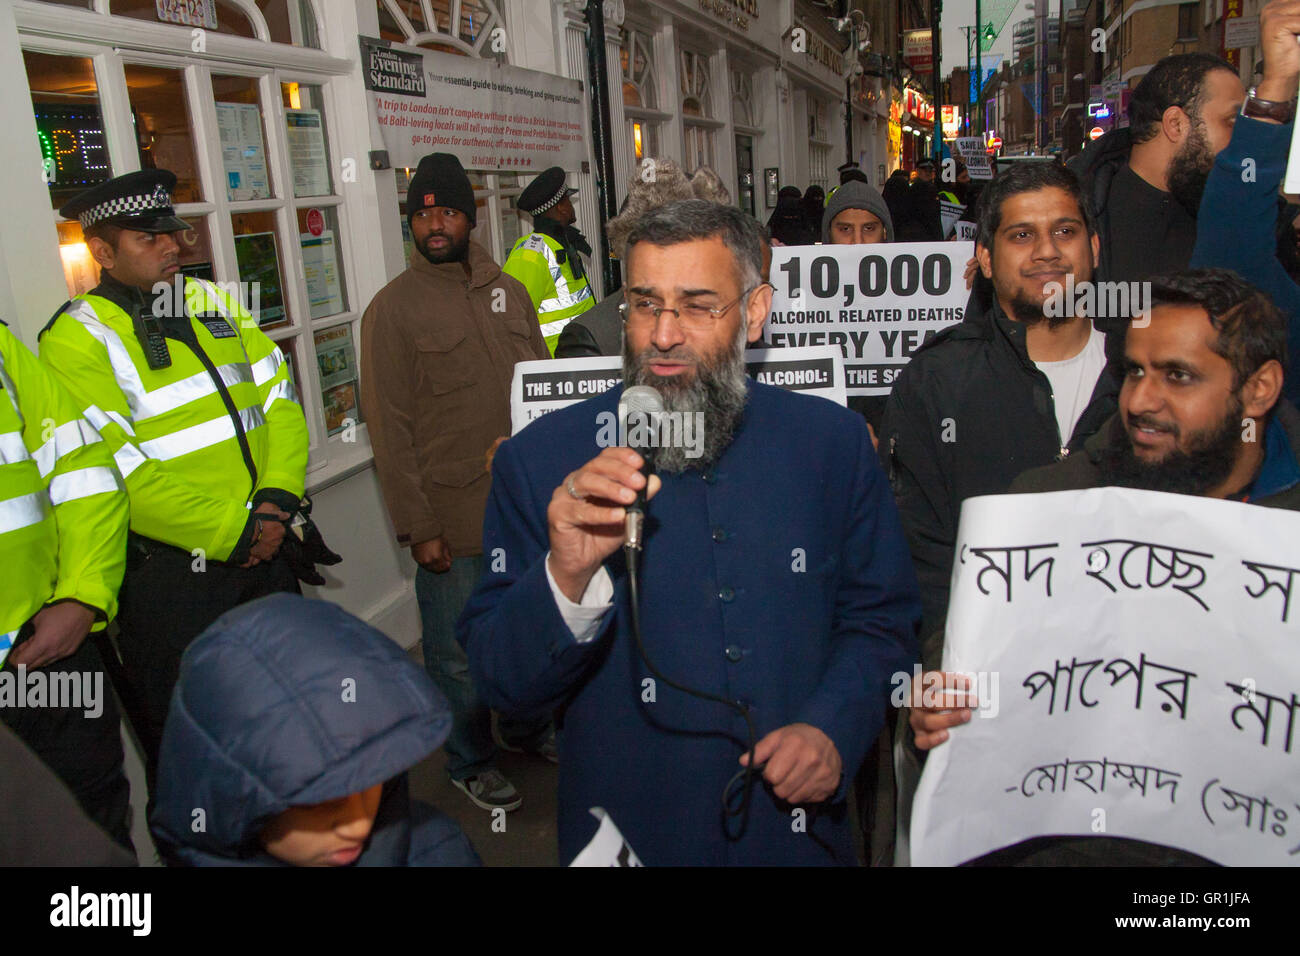 Brick Lane, London, December 13th 2013. Anjem Choudary, with microphone, leads his  'Sharia Project' as they demonstrate in Brick Lane against the consumption of Alchohol, blaming society's ills on drinking, and demanding that strict Sharia law be imposed to replace 'man-made' laws. Credit:  Paul Davey/Alamy Live News Stock Photo